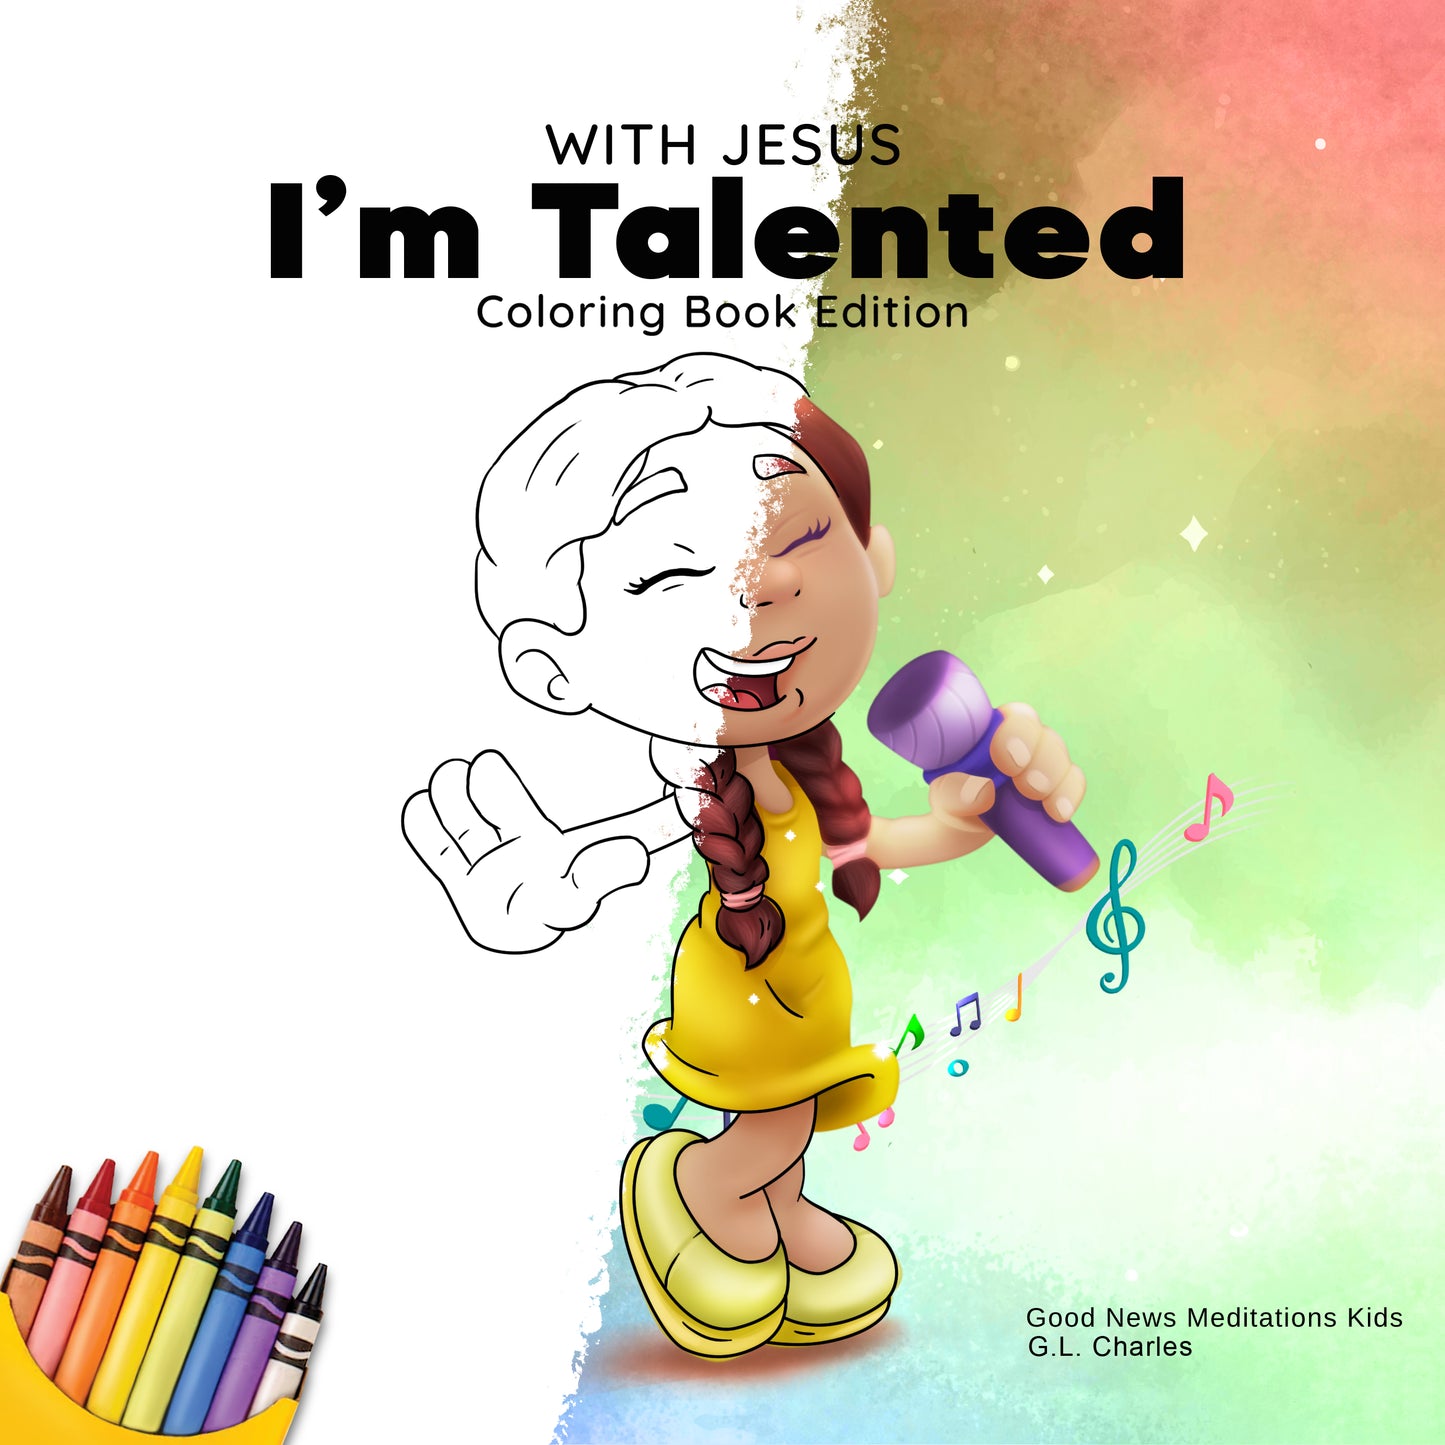 With Jesus I am Talented Coloring Book - Print Ready - Digital Product - Instant Download